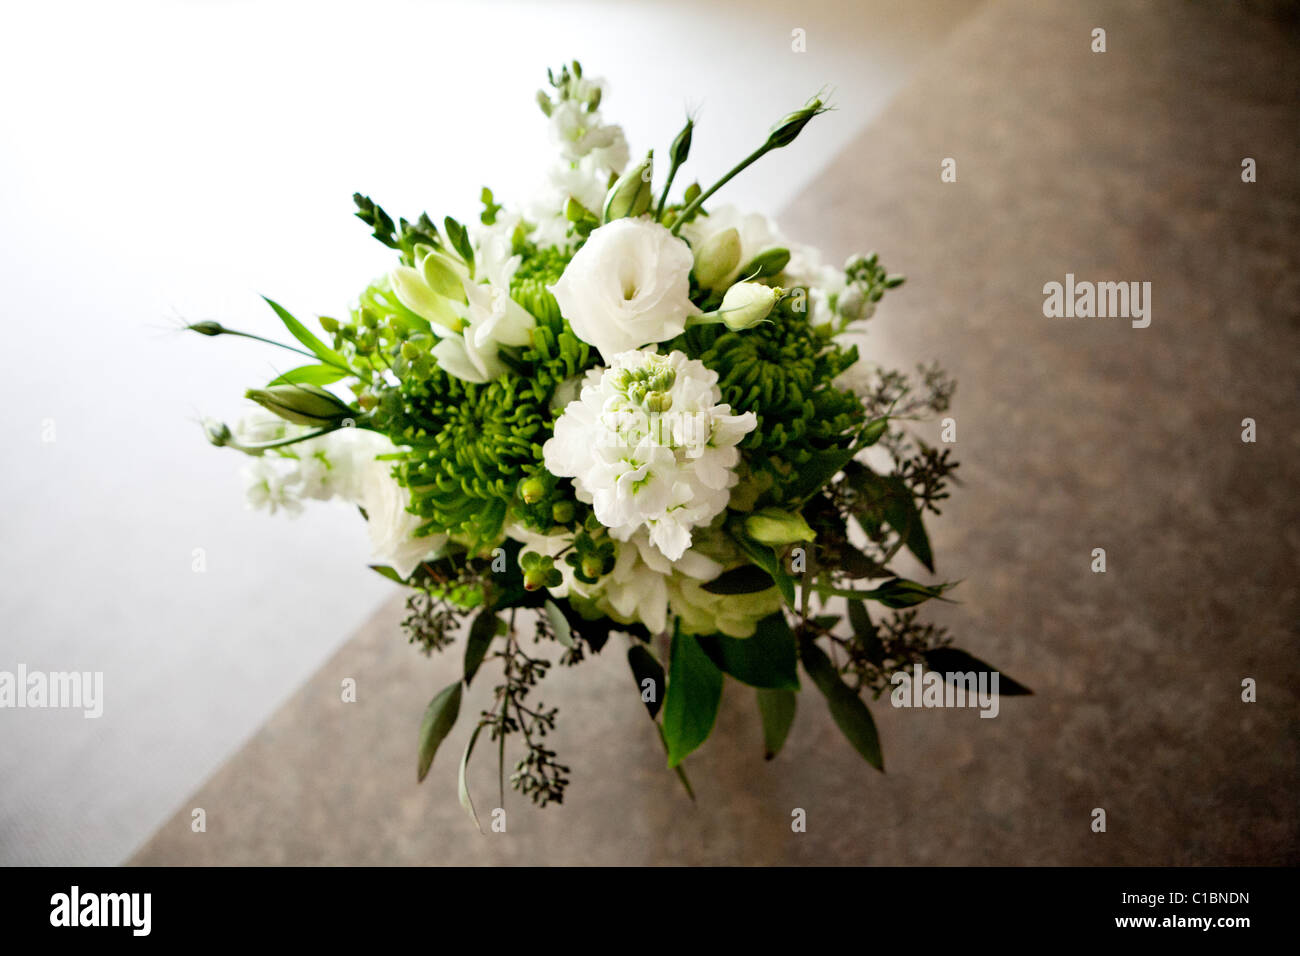 WEDDING FLOWER BOUQUET FLOWERS CLASSIC TRADITIONAL WHITE GREEN COLOR Stock Photo